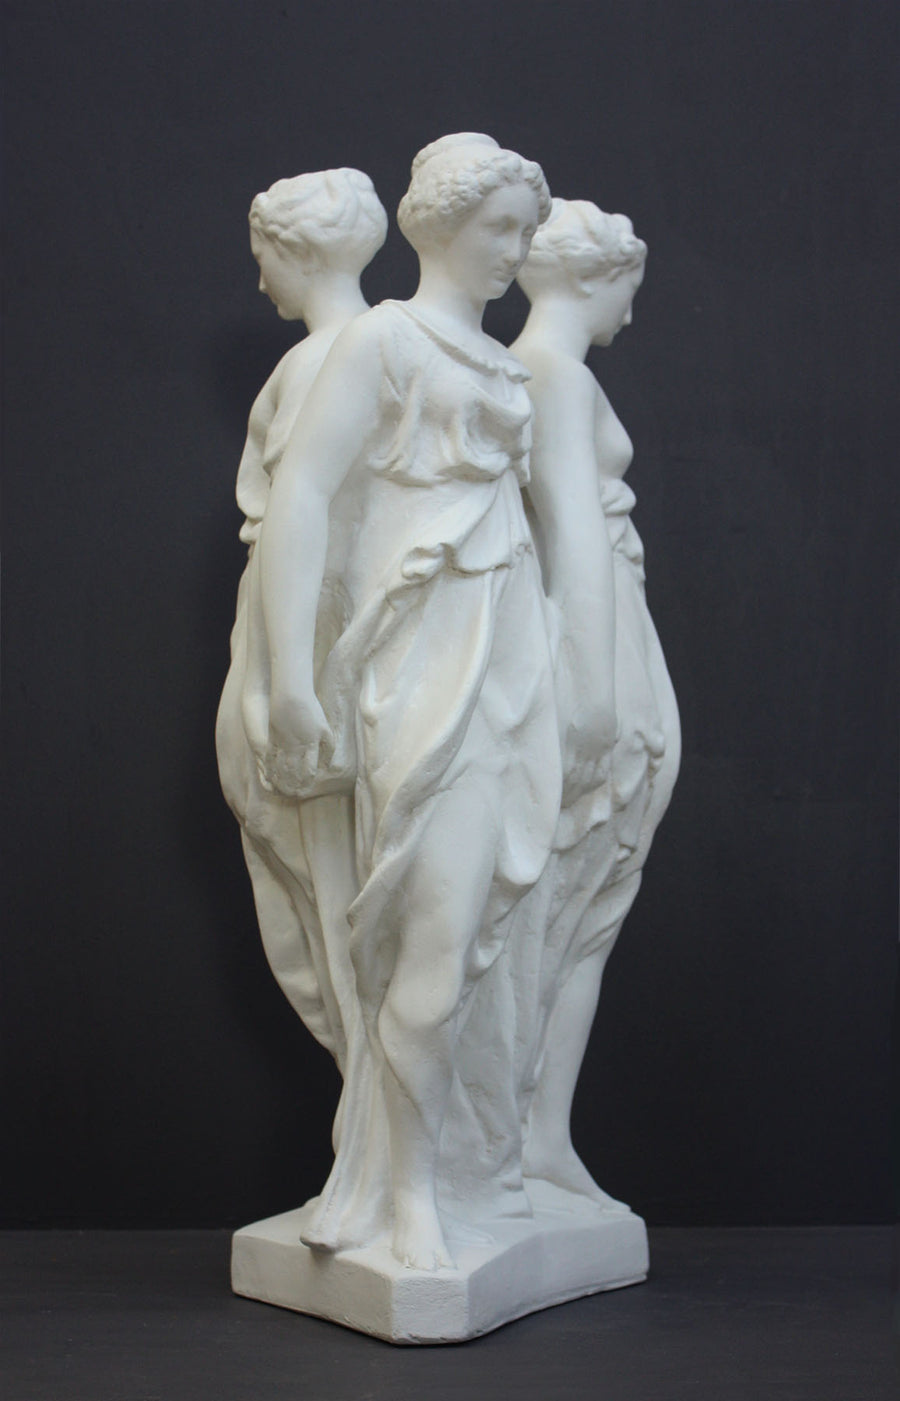 photo of white plaster cast sculpture of three robed females standing in a circle with their backs to each other against a gray background